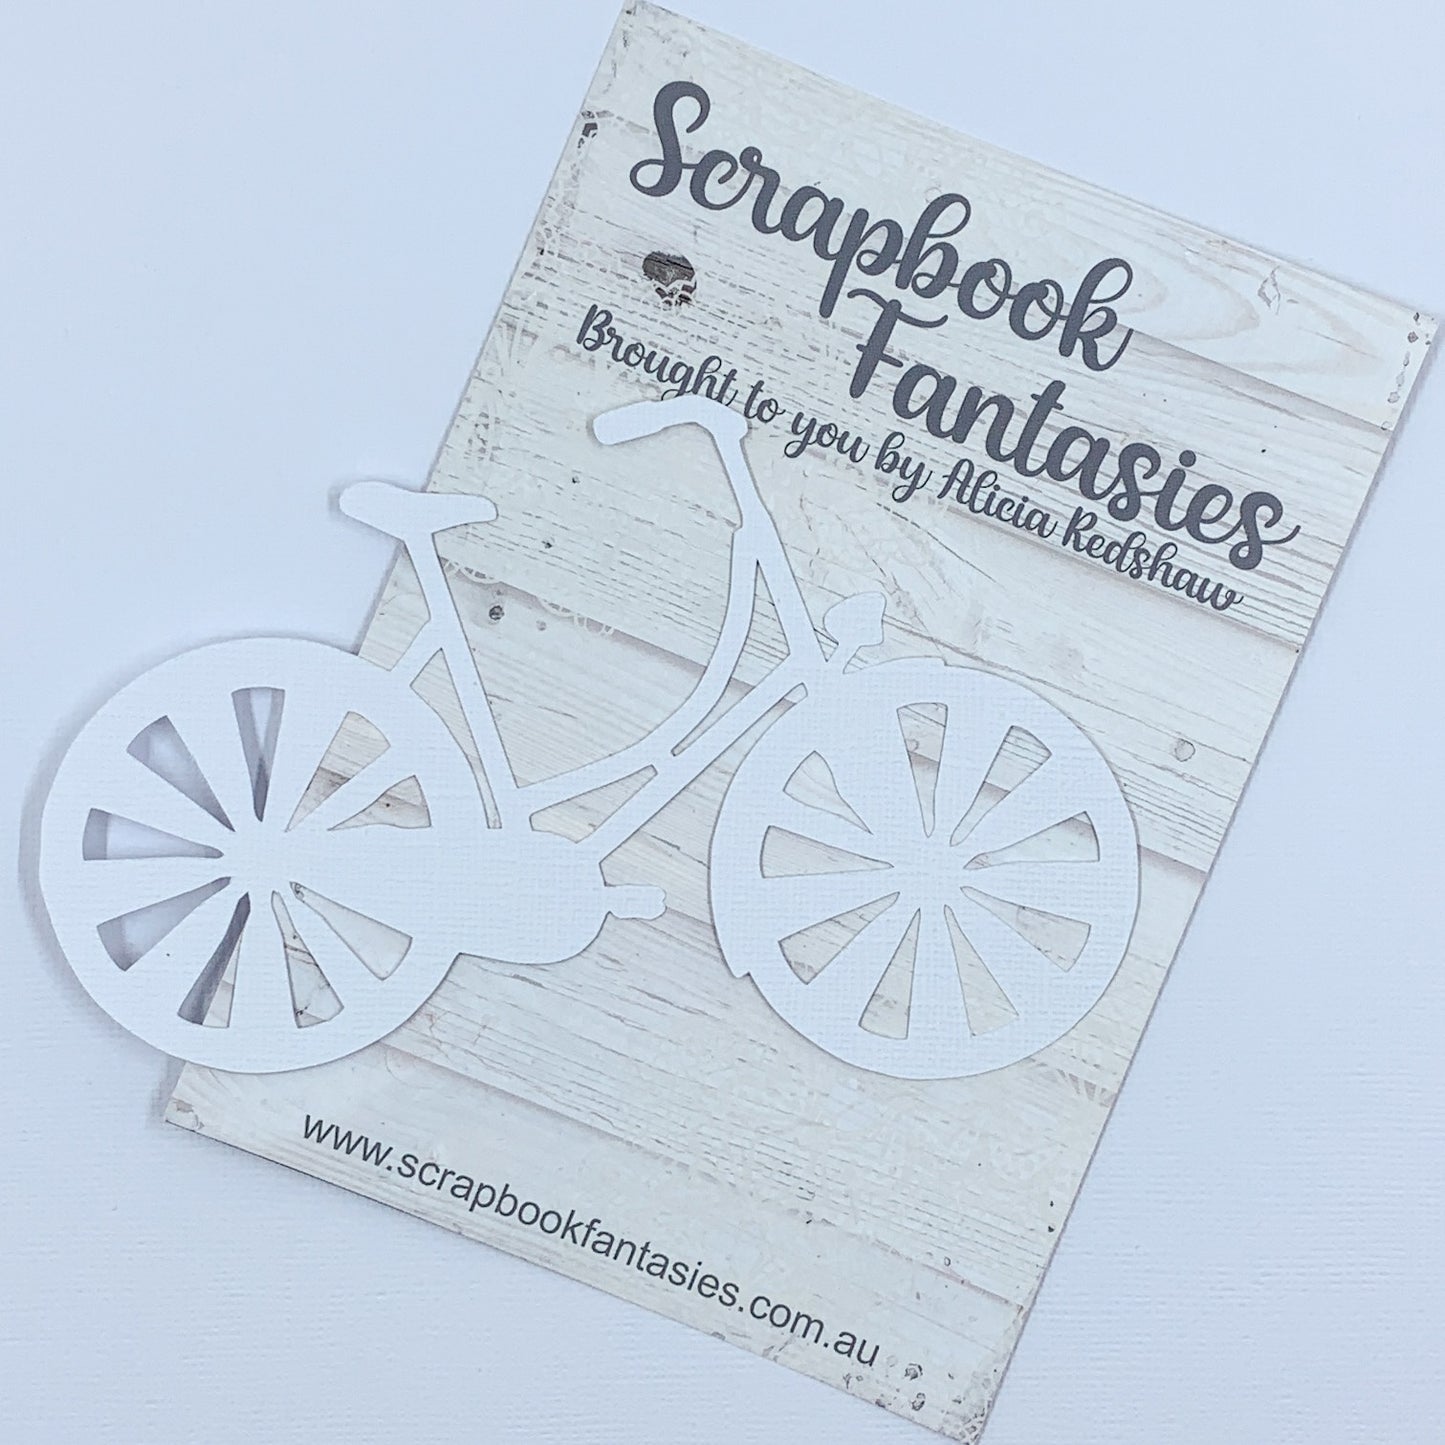 Bicycle 5.75"x3.75" White Linen Cardstock Cutout - Designed by Alicia Redshaw